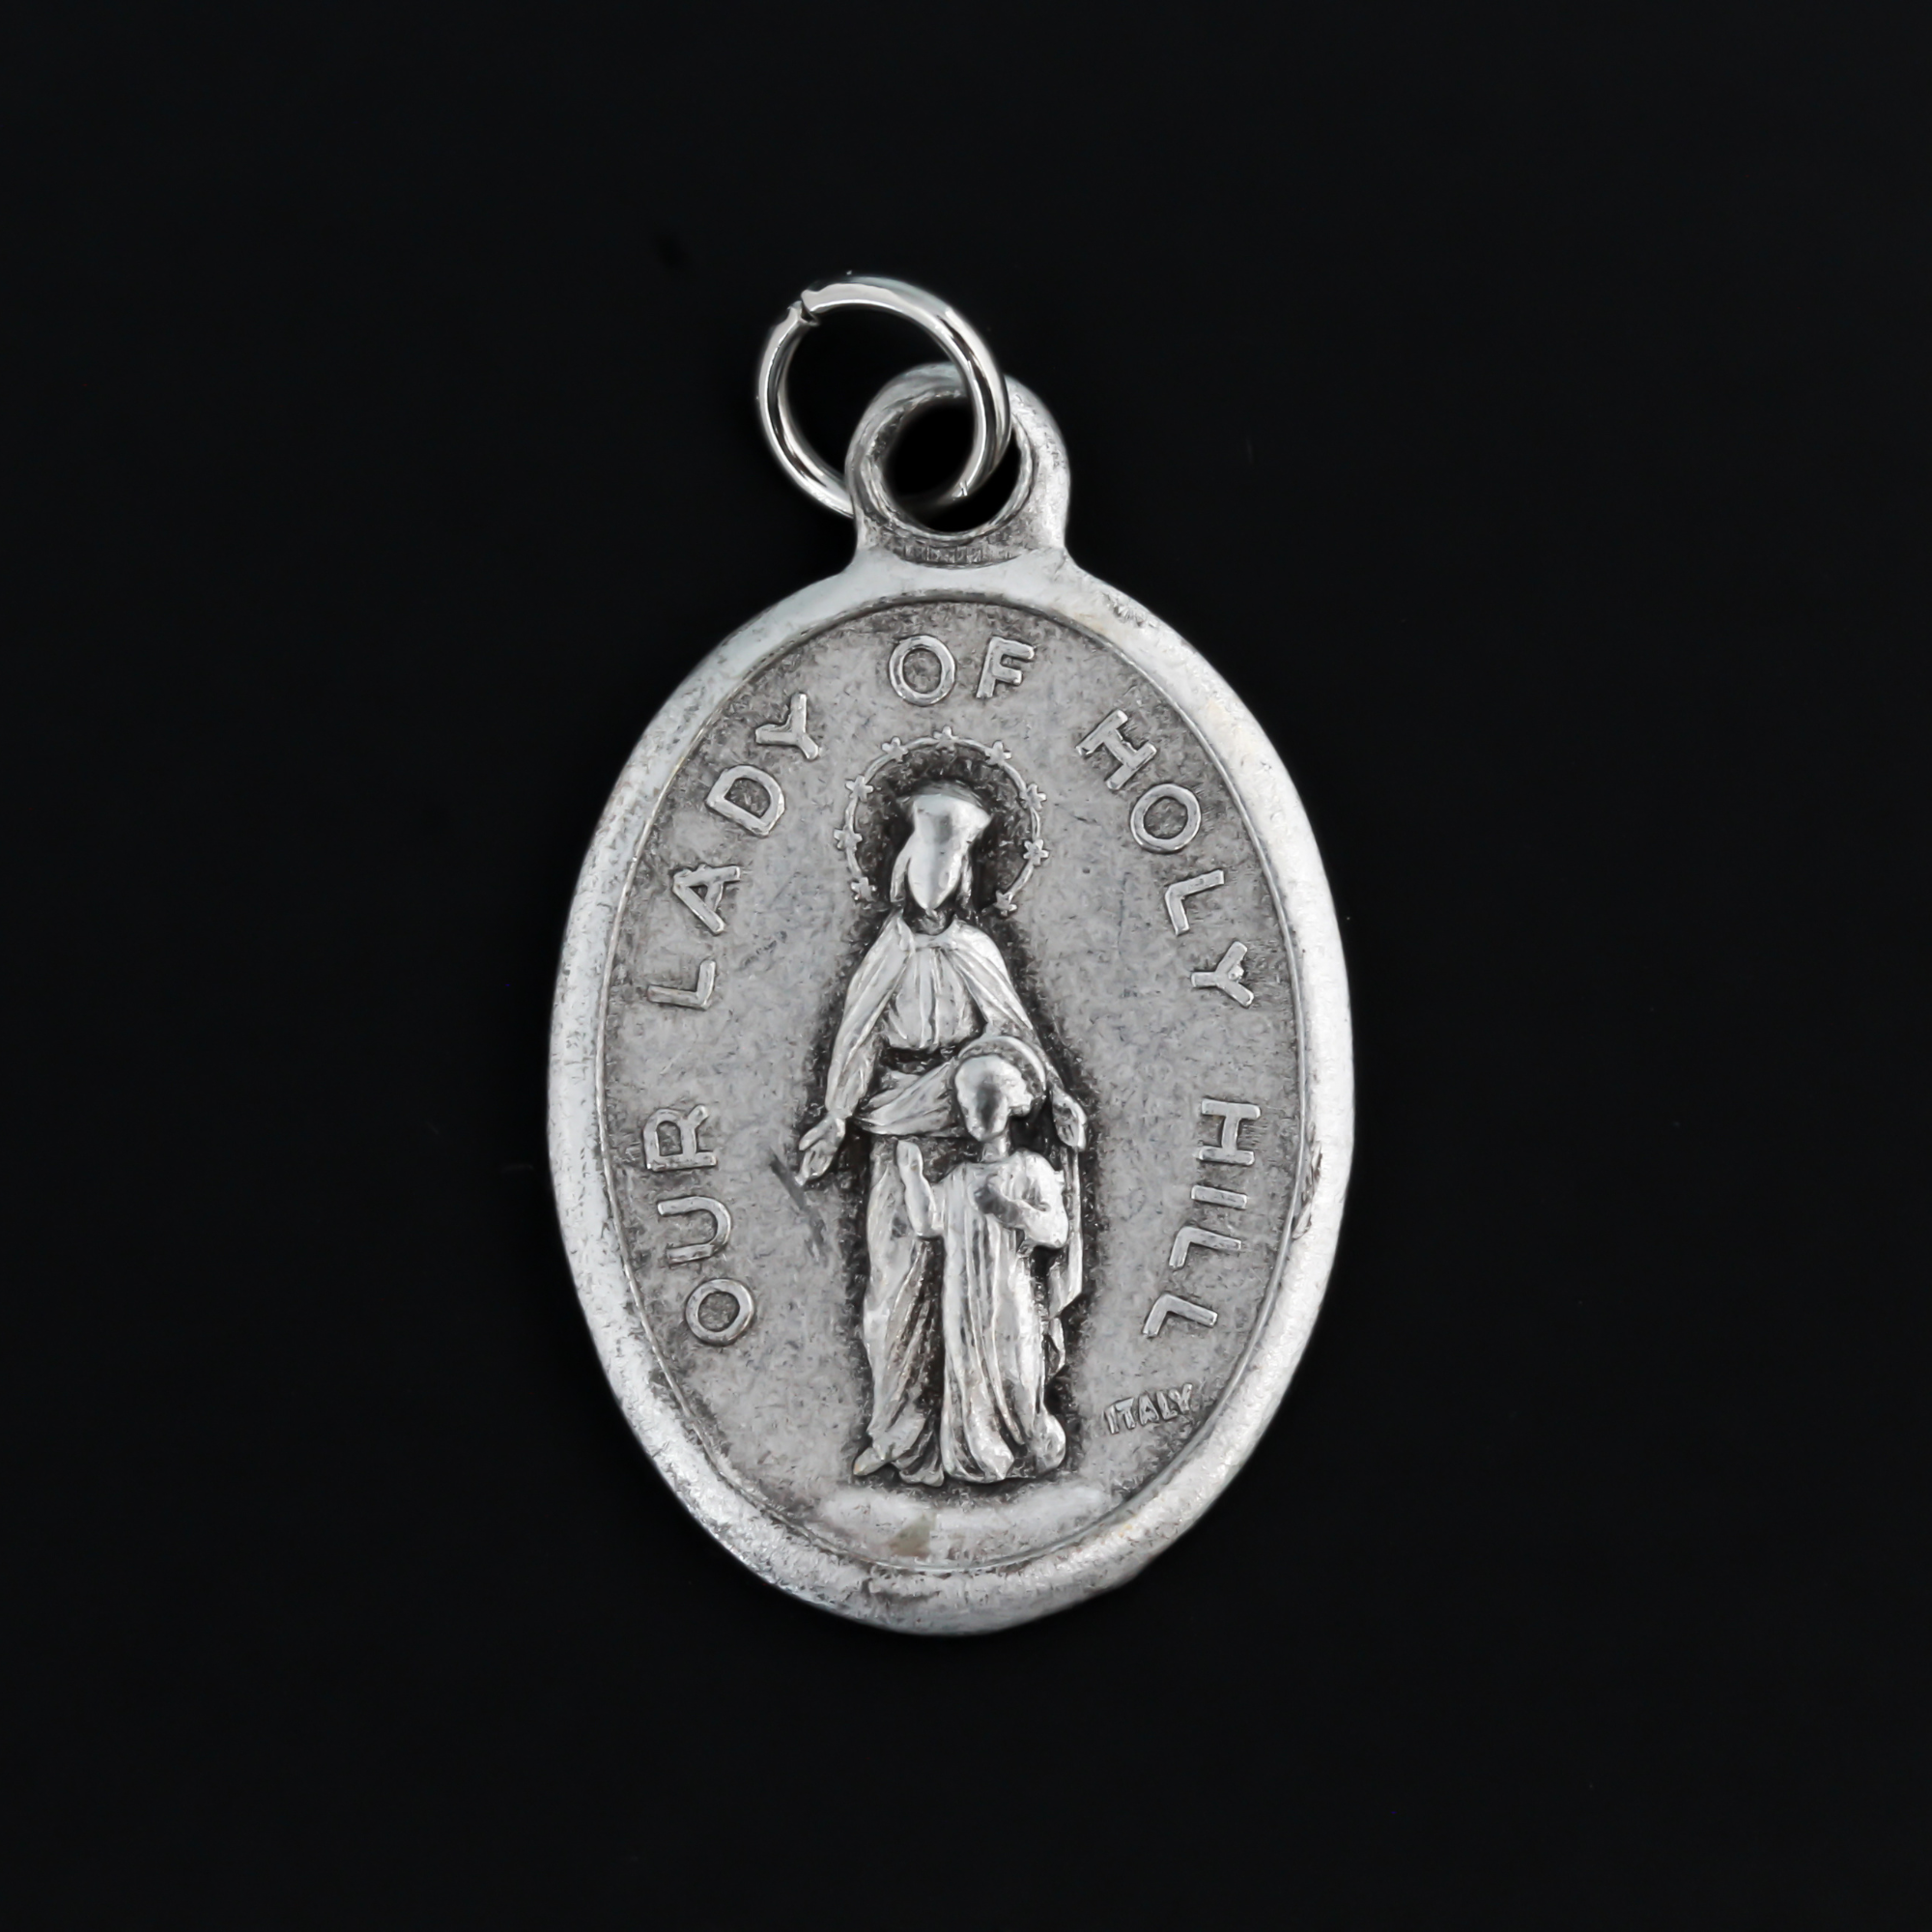 Our Lady of Holy Hill medal that depicts Mary on the front and the Holy Hill Basilica in Wisconsin on the back